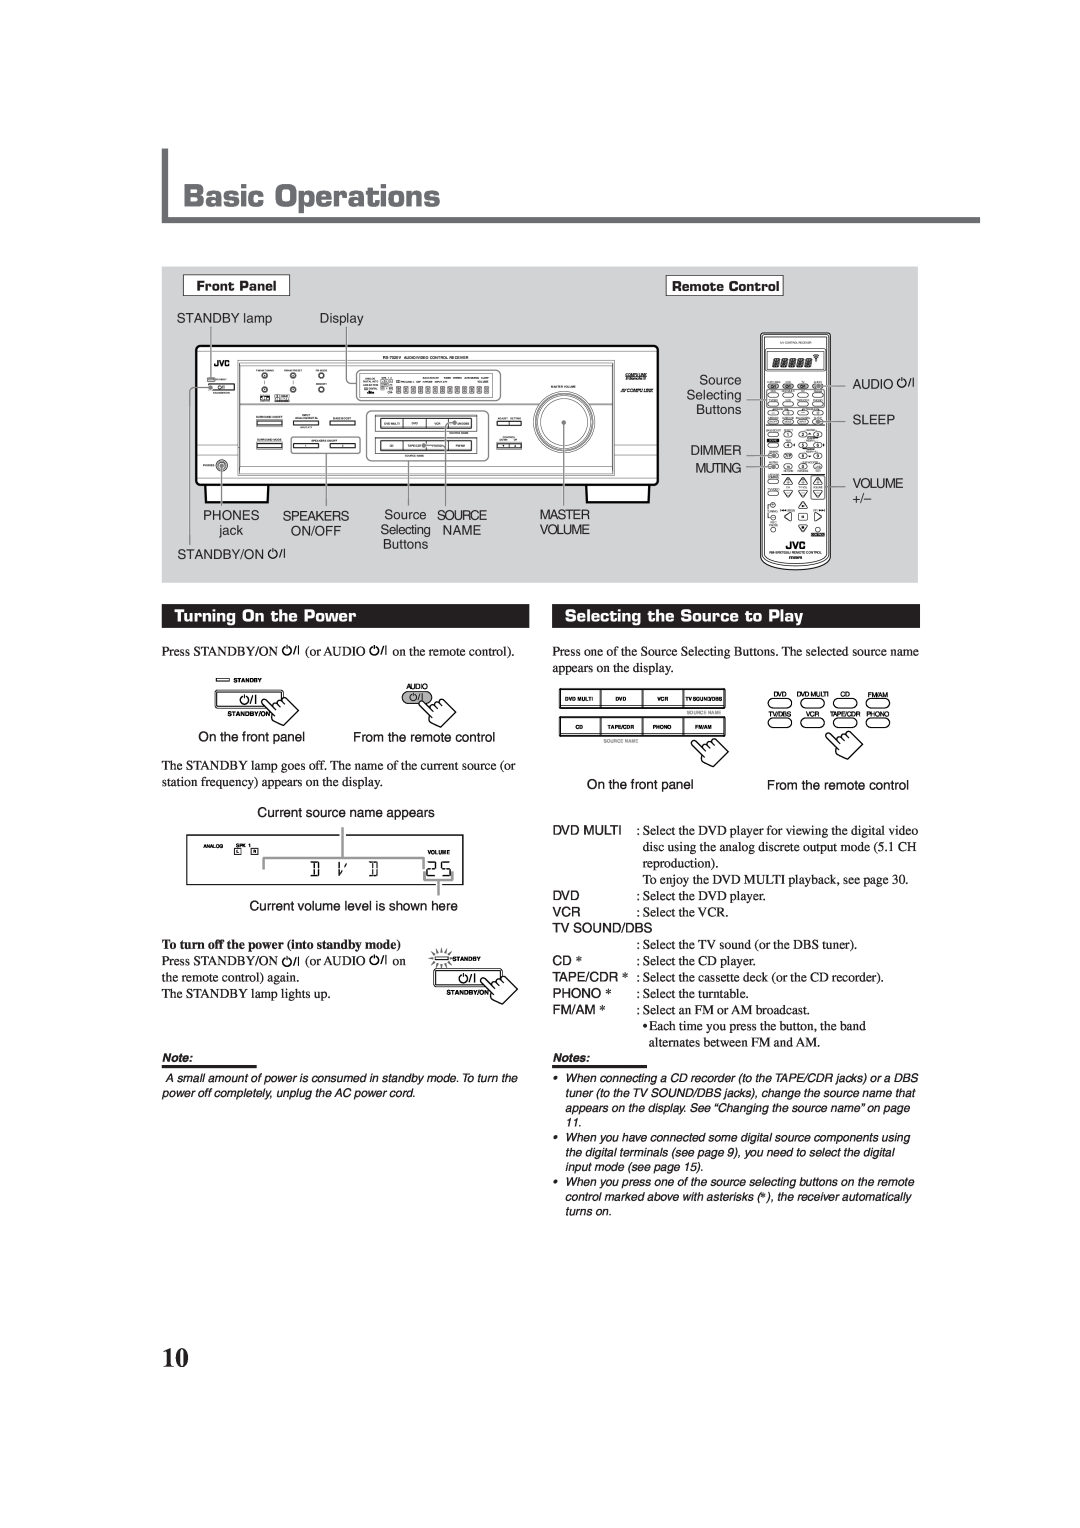 JVC RX-7020VBK manual Basic Operations, Turning On the Power, Selecting the Source to Play 